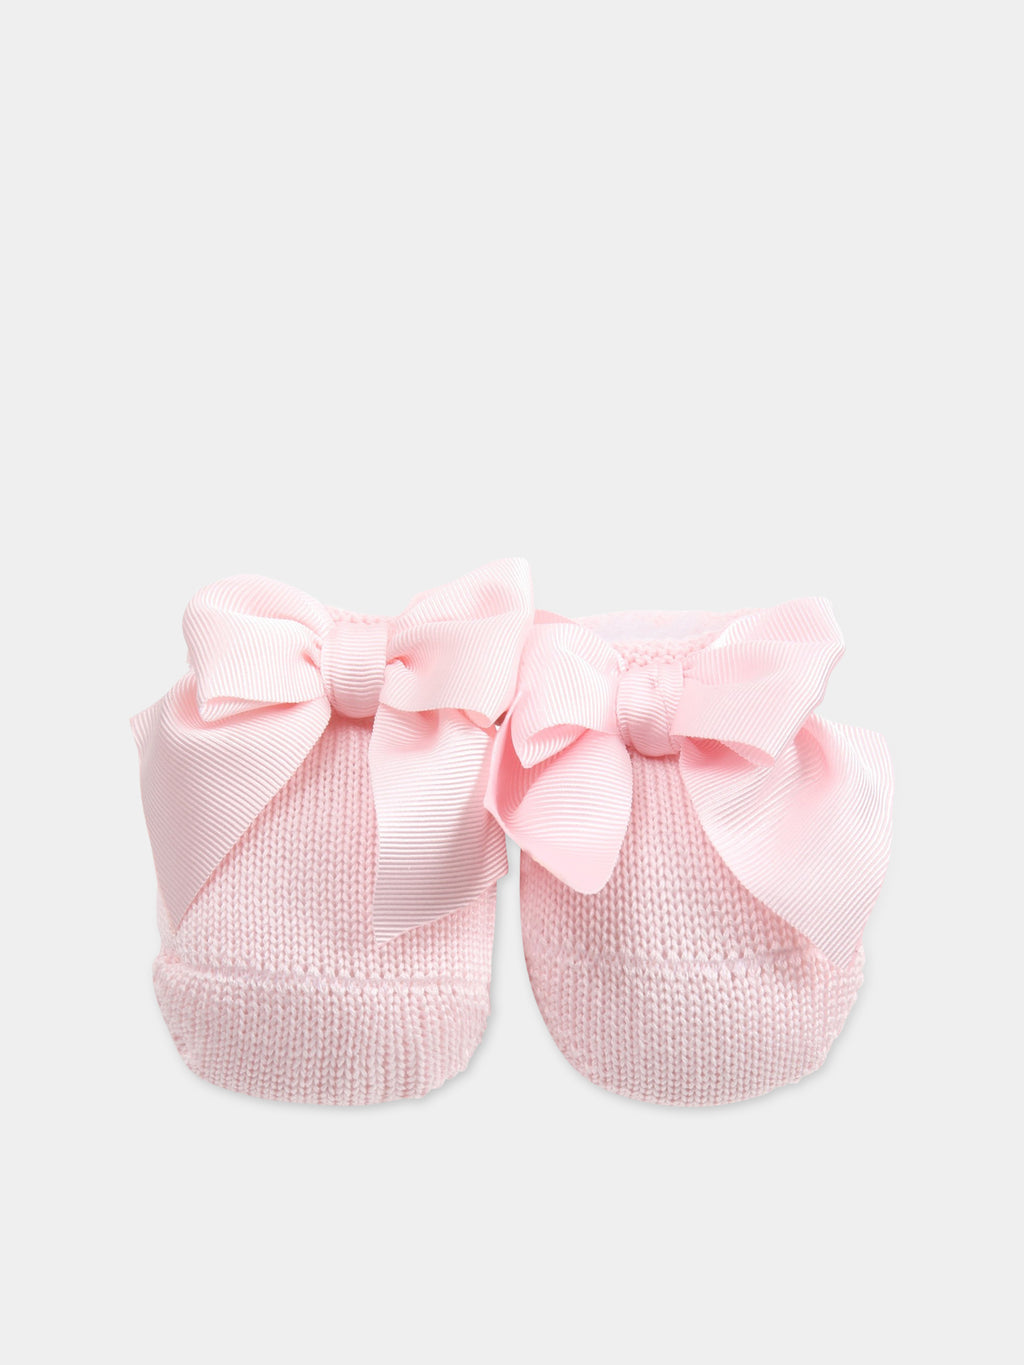 Pink baby bootee for babygirl